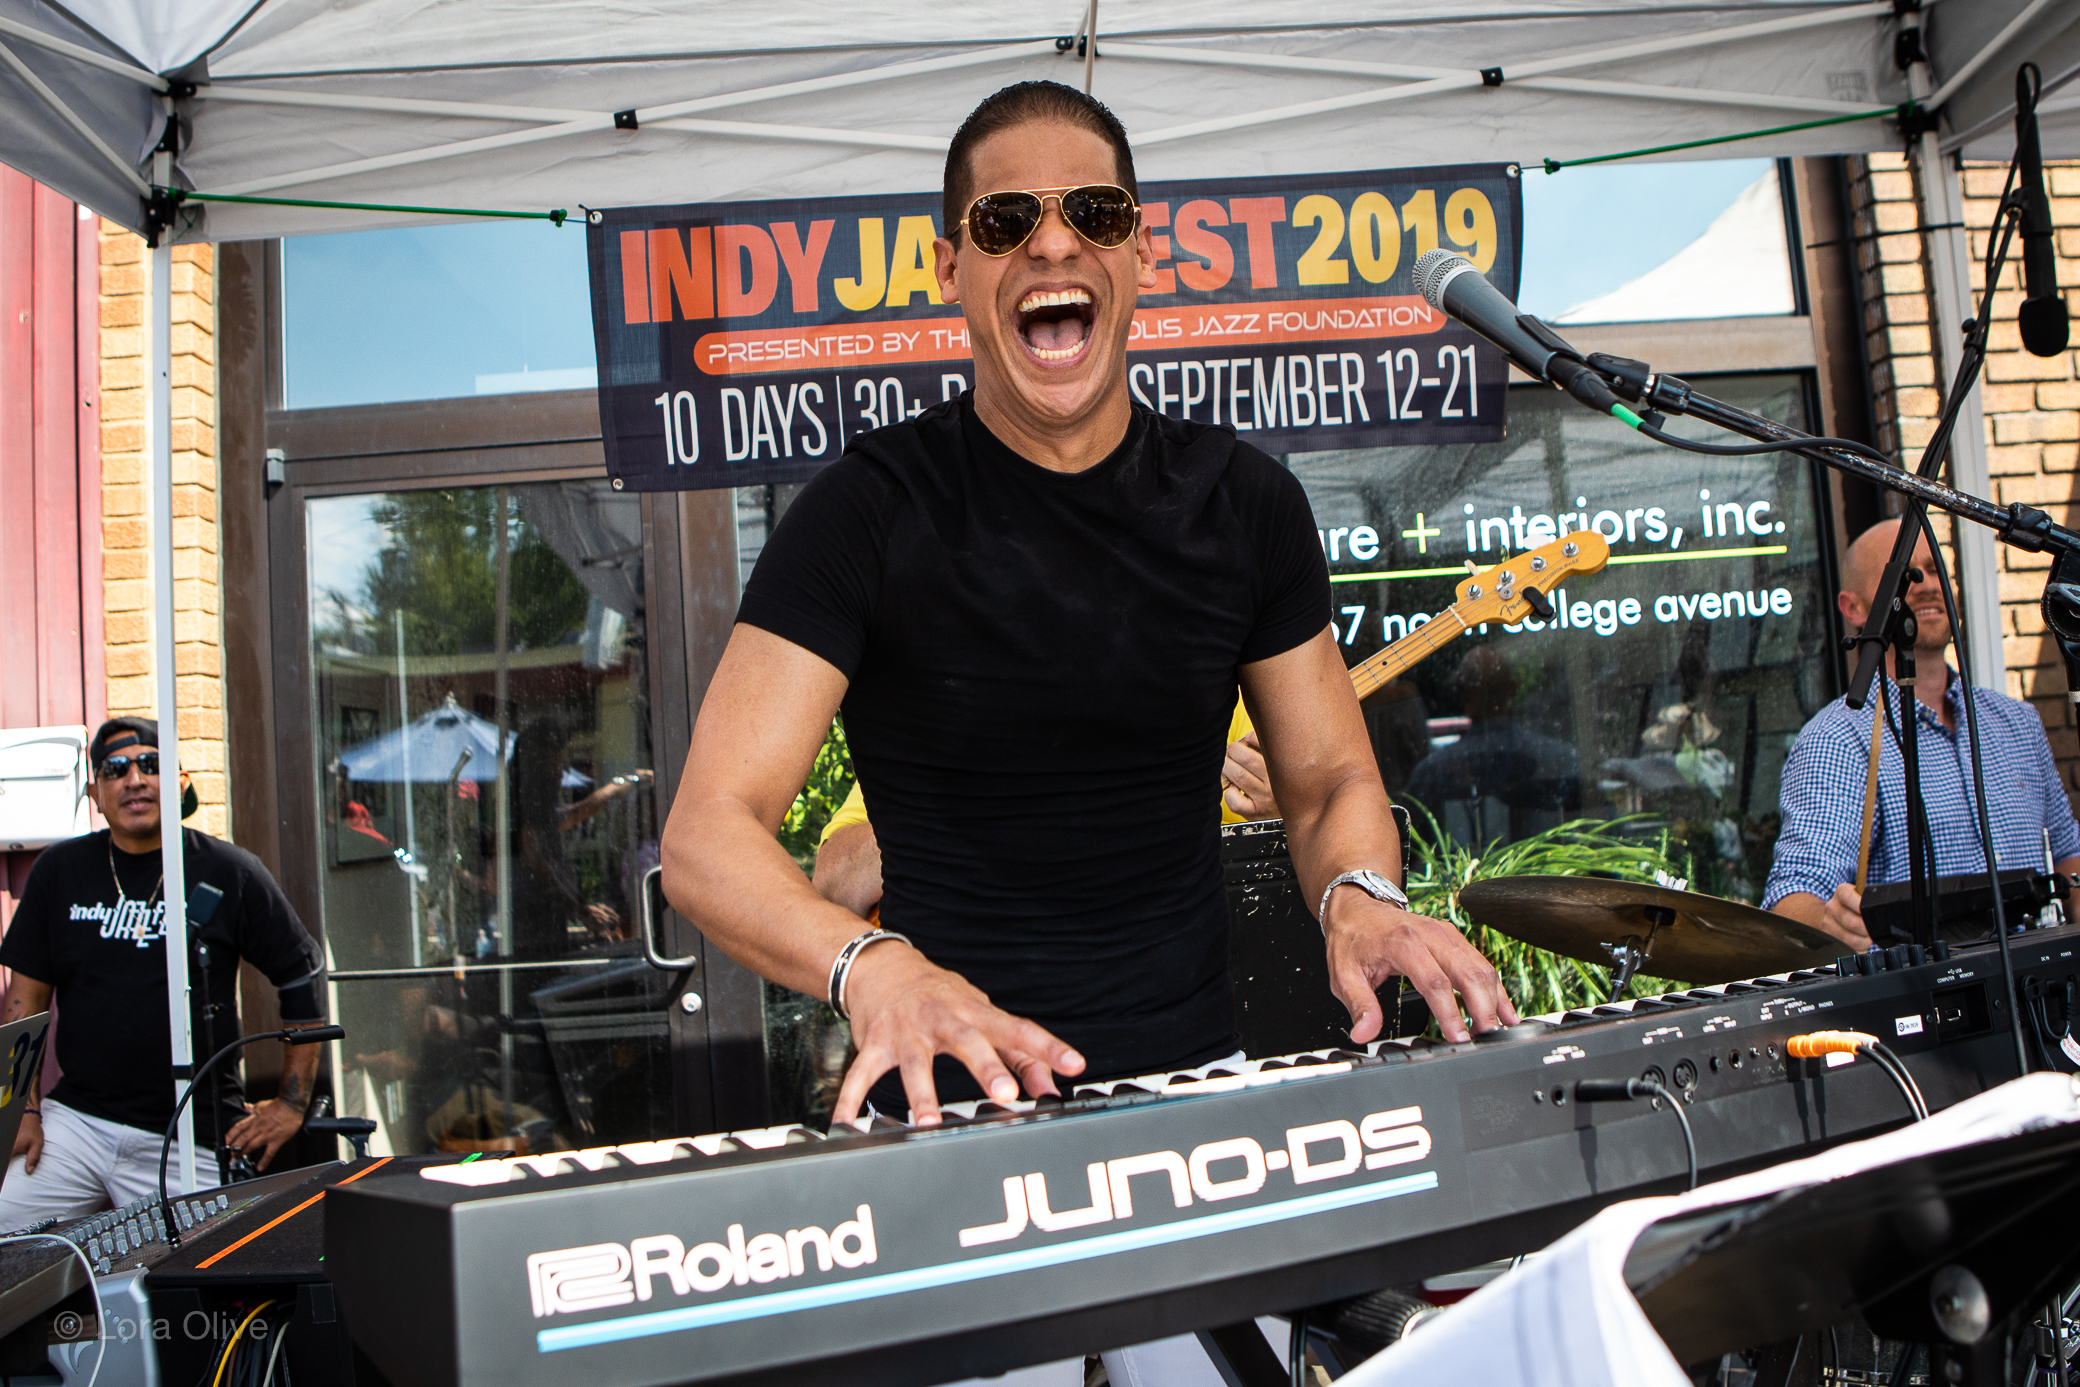 The 24th Annual Labor Day Street Fair presented by The Jazz Kitchen and Yats